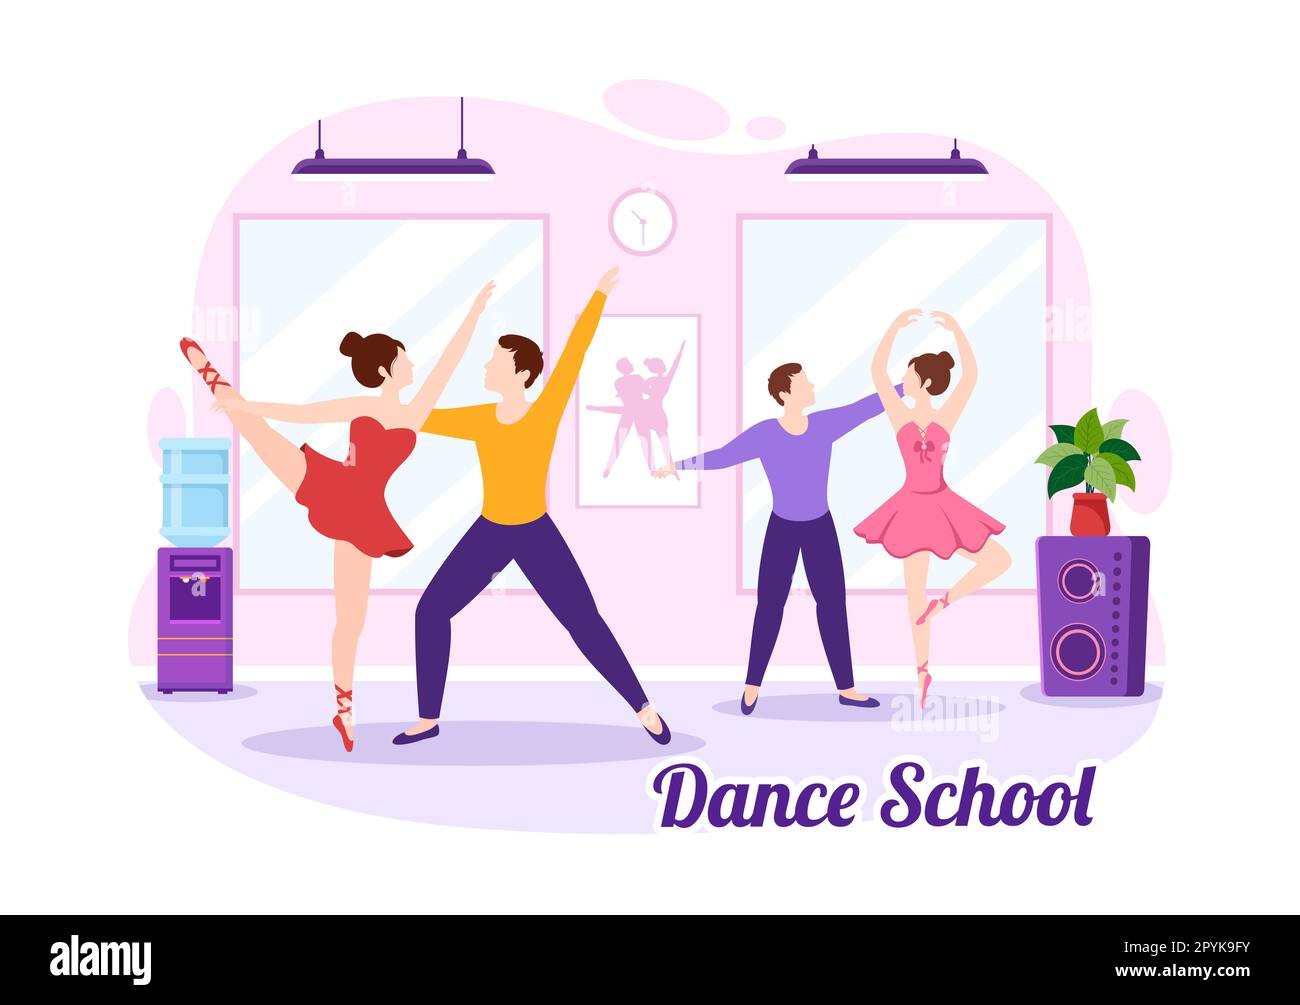 Dance School Illustration of People Dancing or Choreography with Music Equipment in Studio in Flat Cartoon Hand Drawn Landing Page Templates Stock Photo